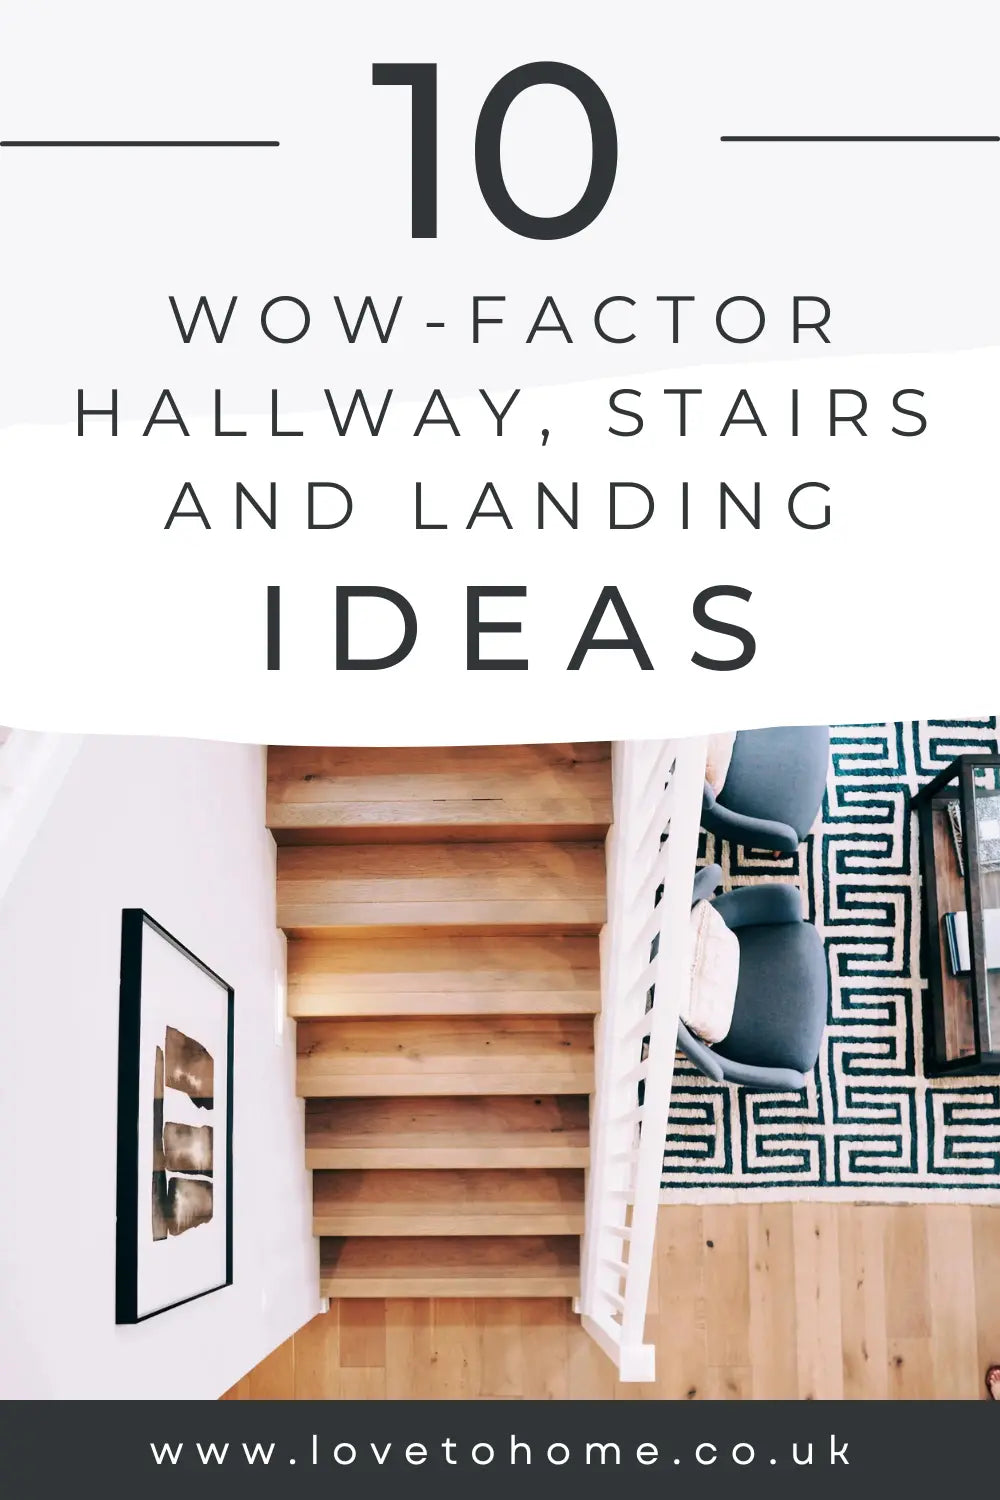 10 Wow-Factor Hallway, Stairs and Landing Ideas